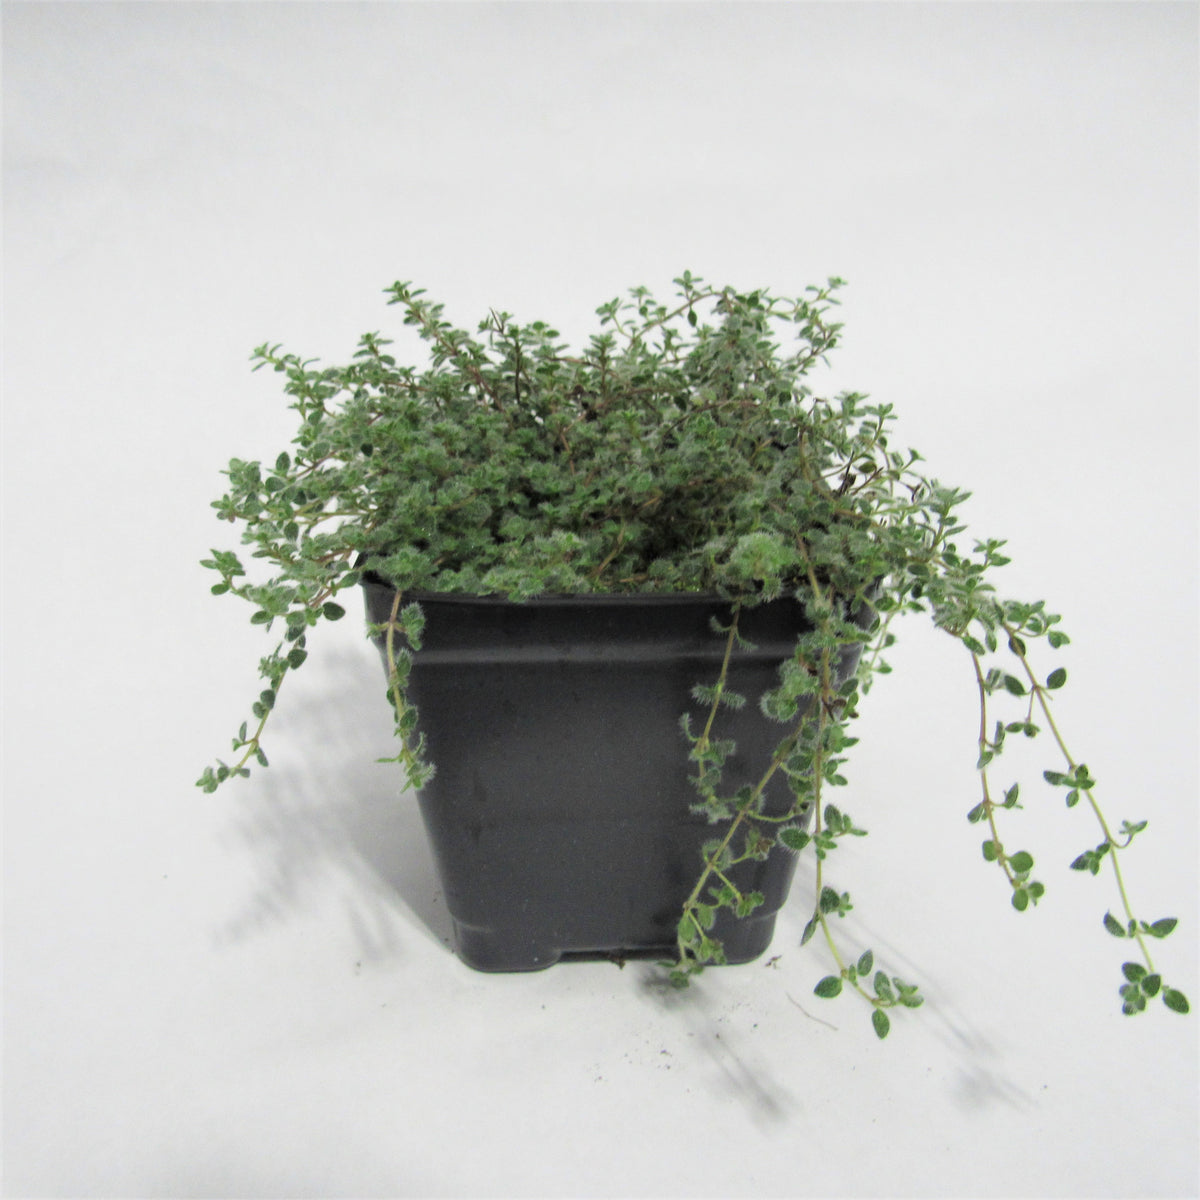 Thyme 'Woolly'